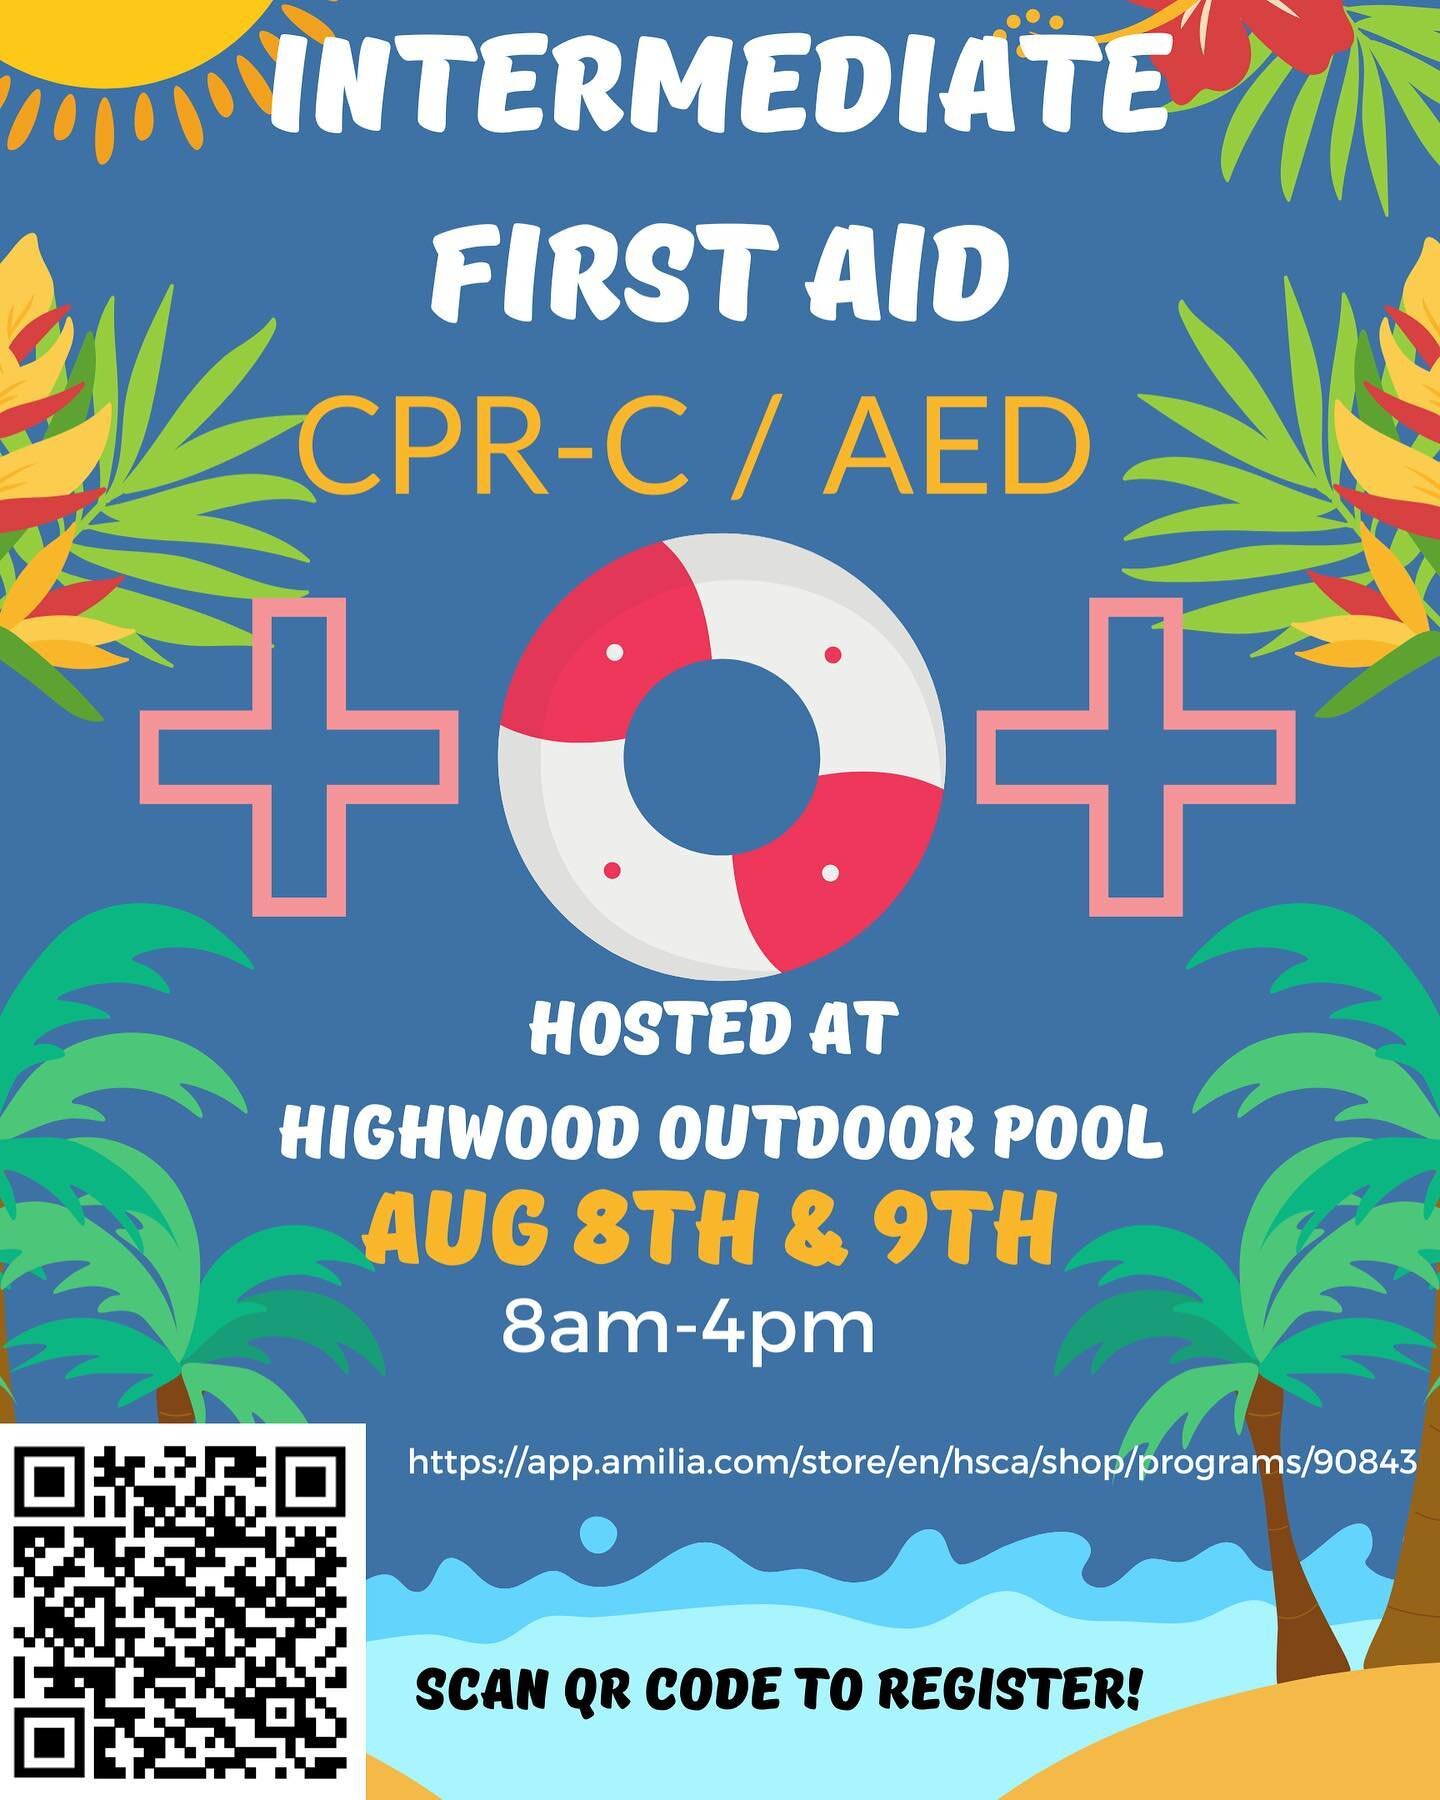 We are running an Intermediate First Aid CPR C/AED (previously known as Standard First Aid) course! August 8th and 9th from 8am-4pm at HIGHWOOD OUTDOOR POOL. Register online at hsca.ca/bowview-swimming-pool. ⚕️🏥